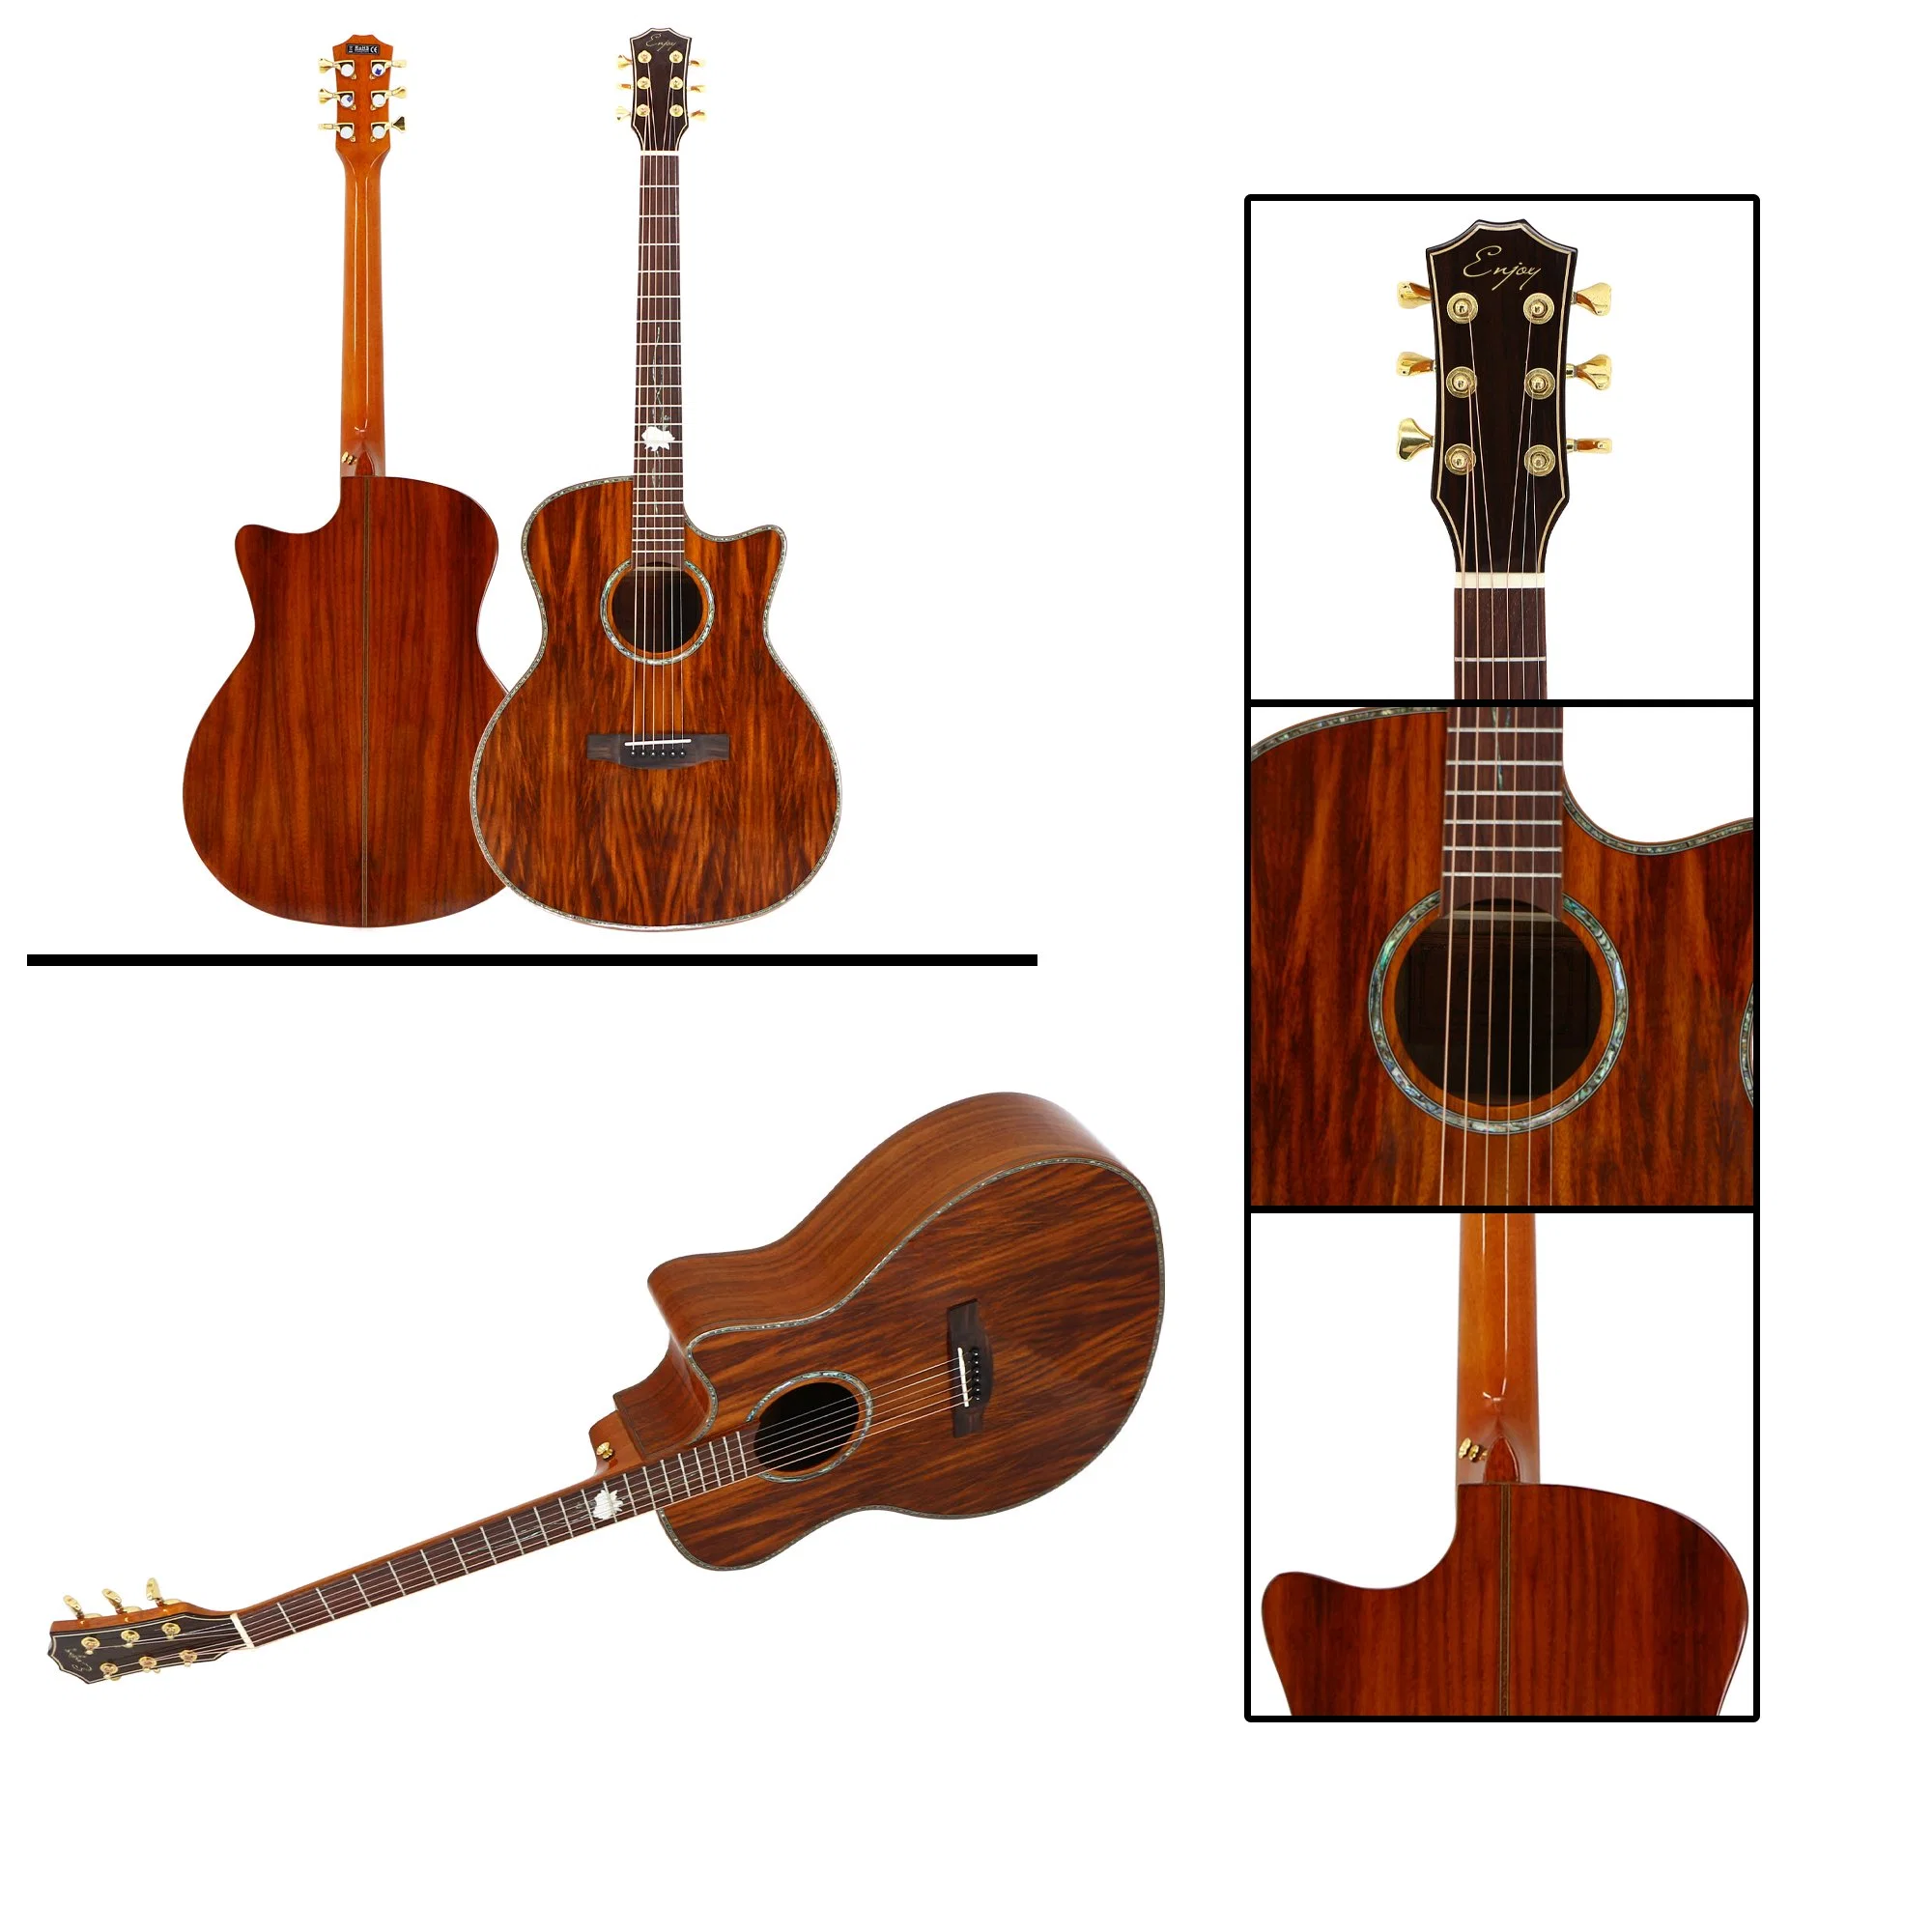 Chinese Factory Dadario String Rosewood Fingerboard Musical Instrument High Gloss Cutway High quality/High cost performance Imported Solid Acacia 41inch Acoustic Guitar